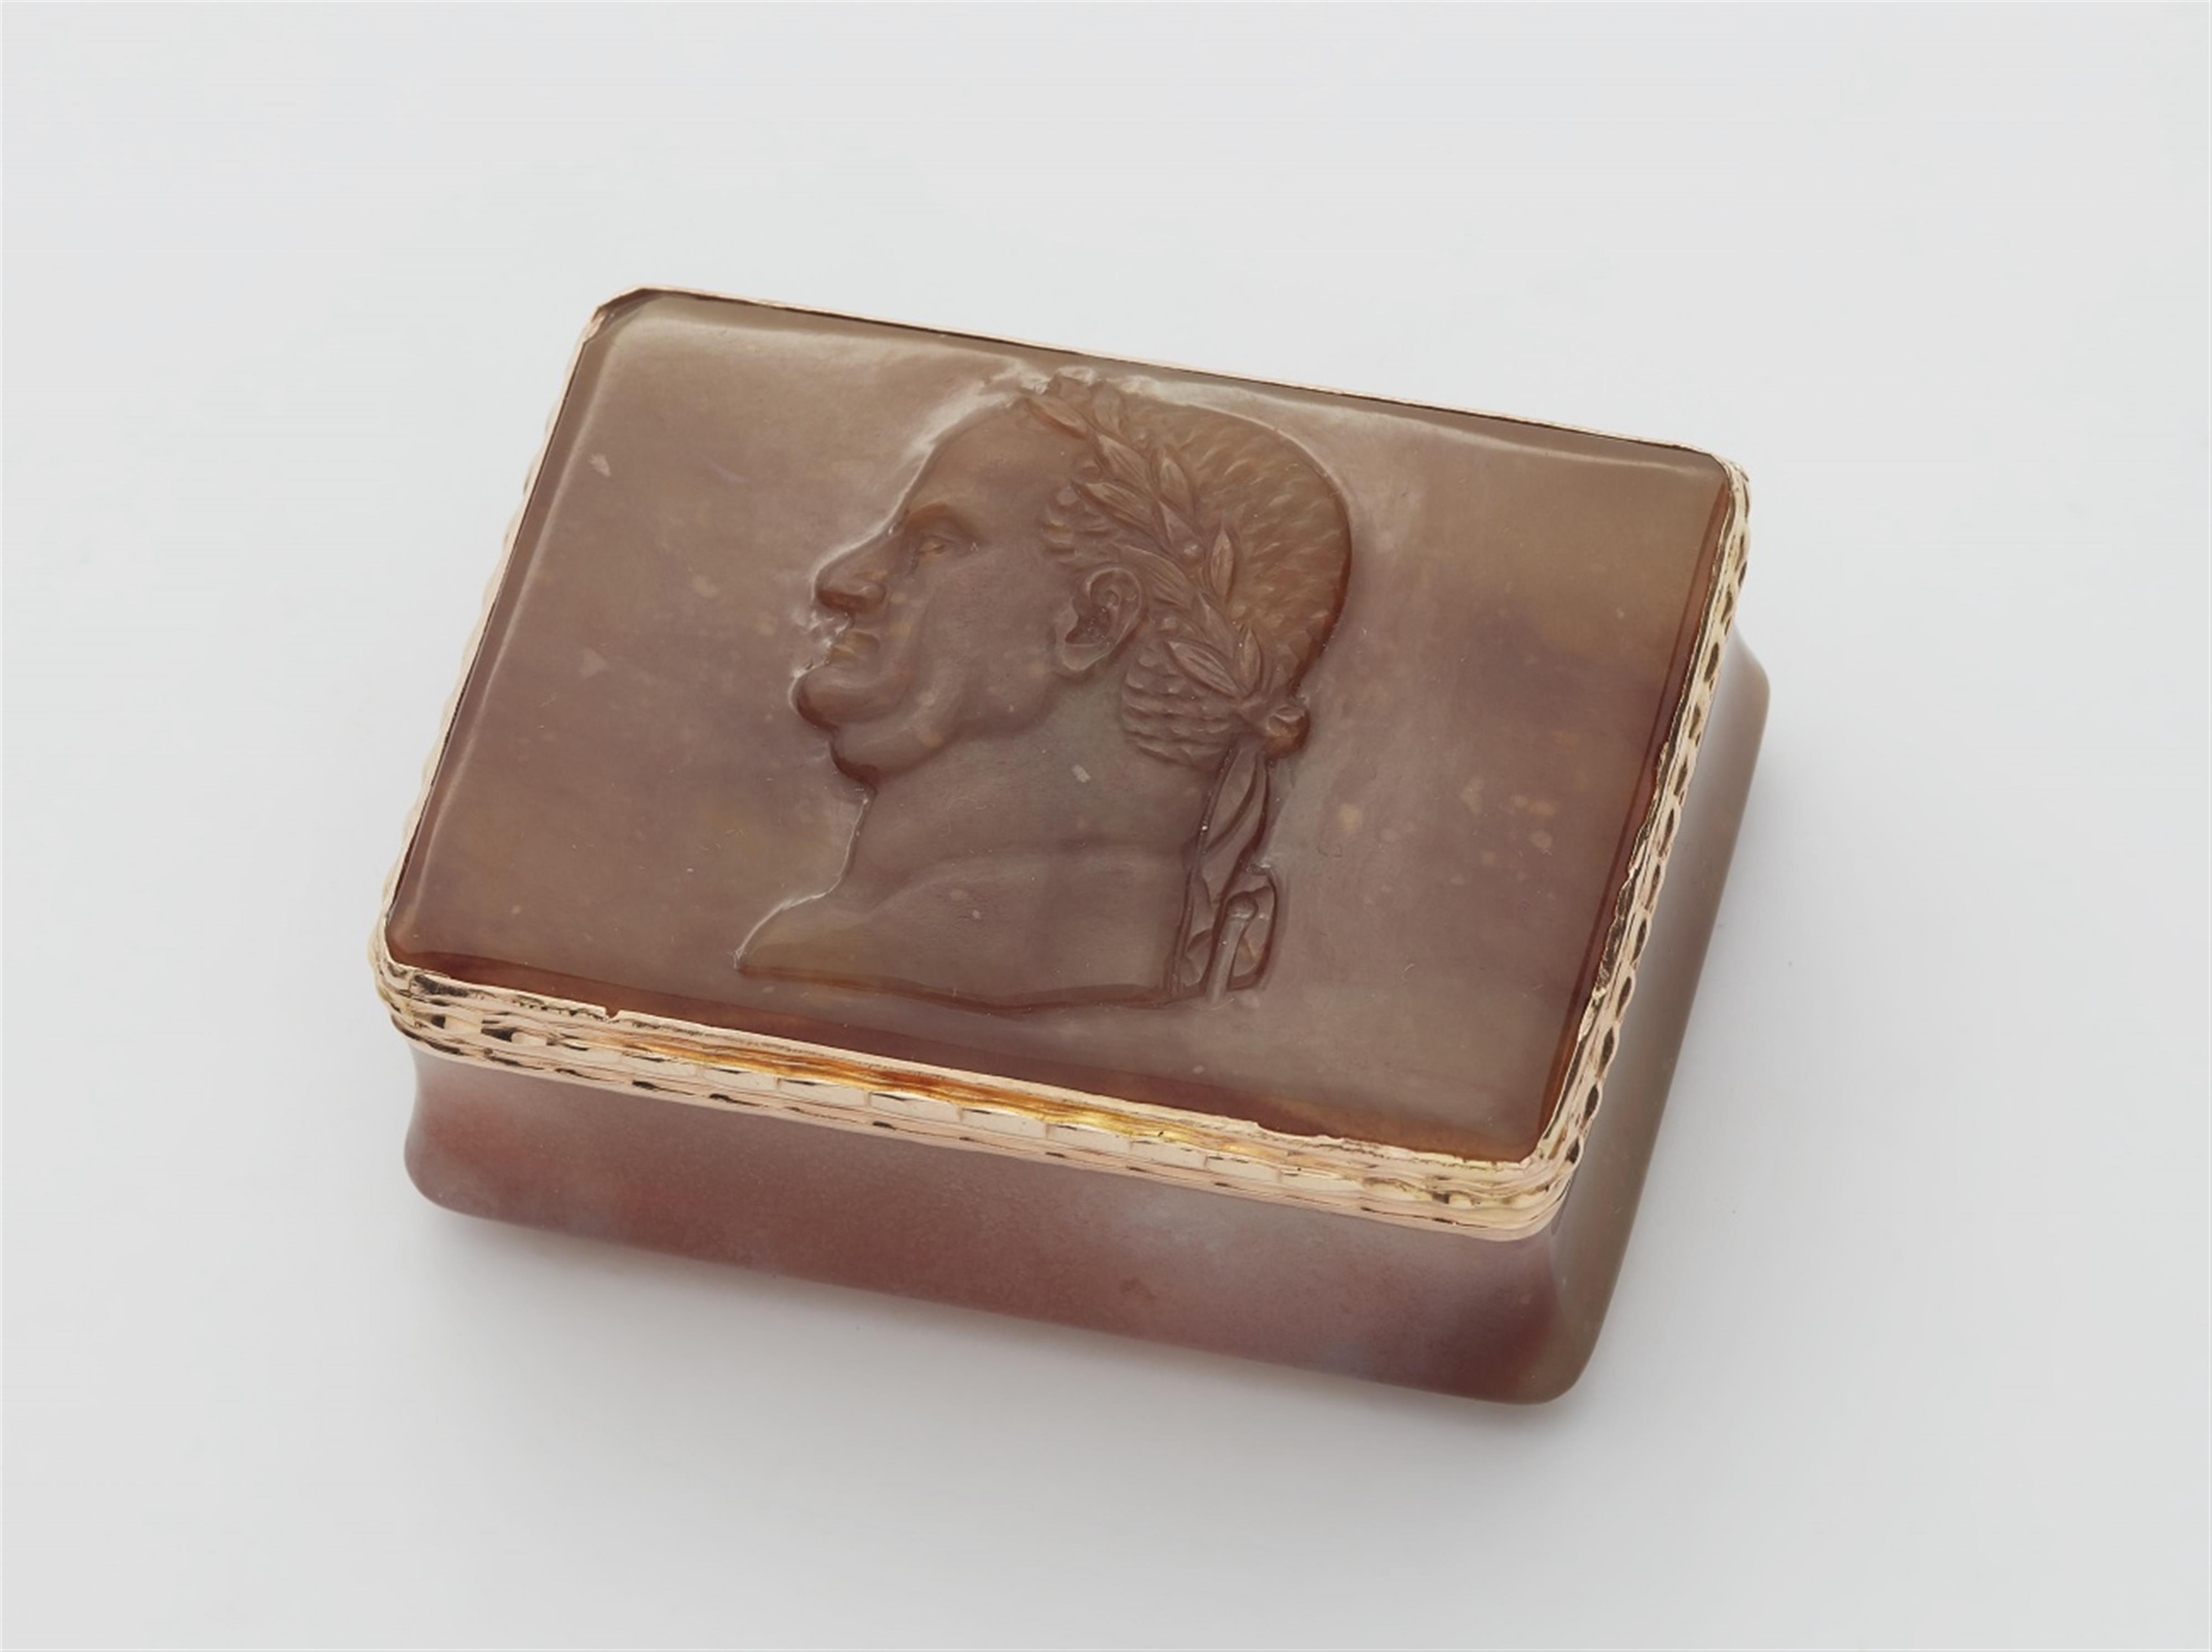 A 14k gold mounted agate box with a cameo portrait - image-1